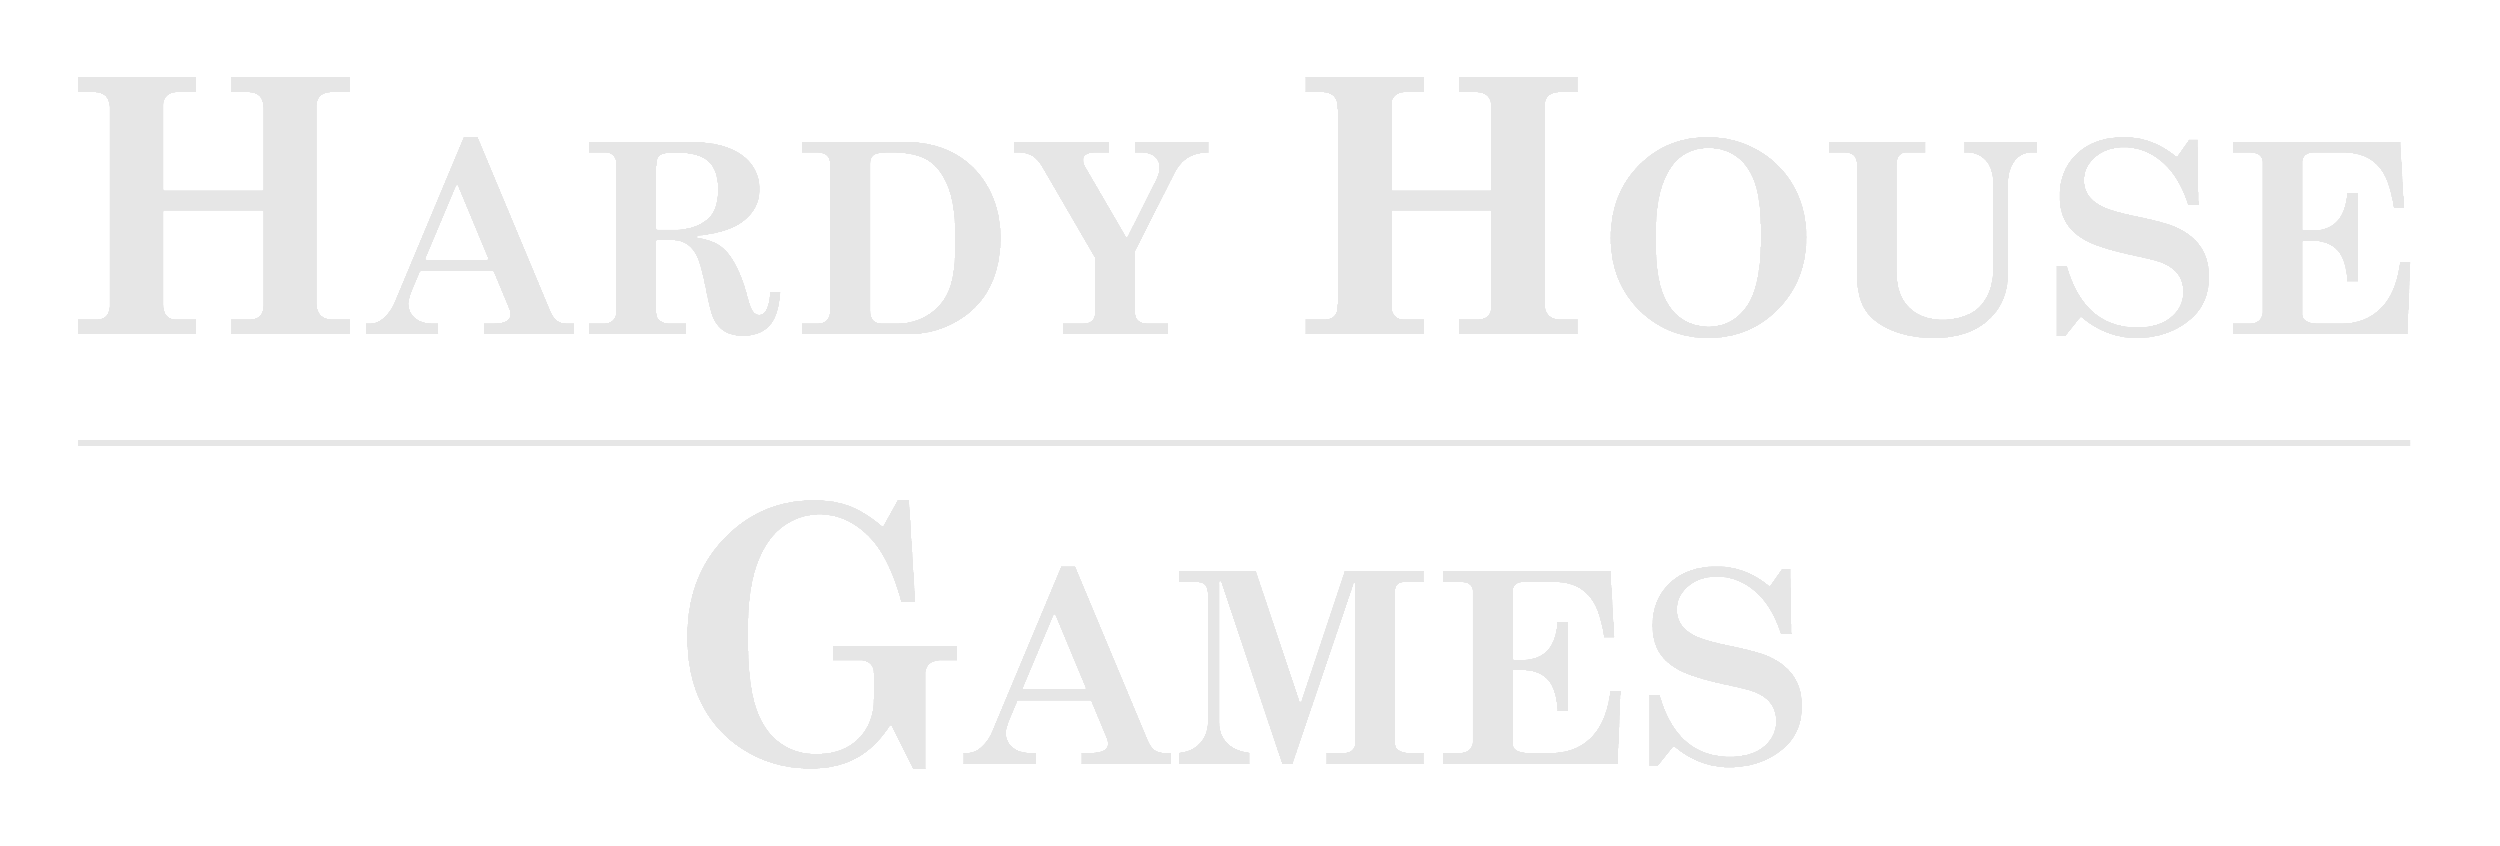 Hardy House Games